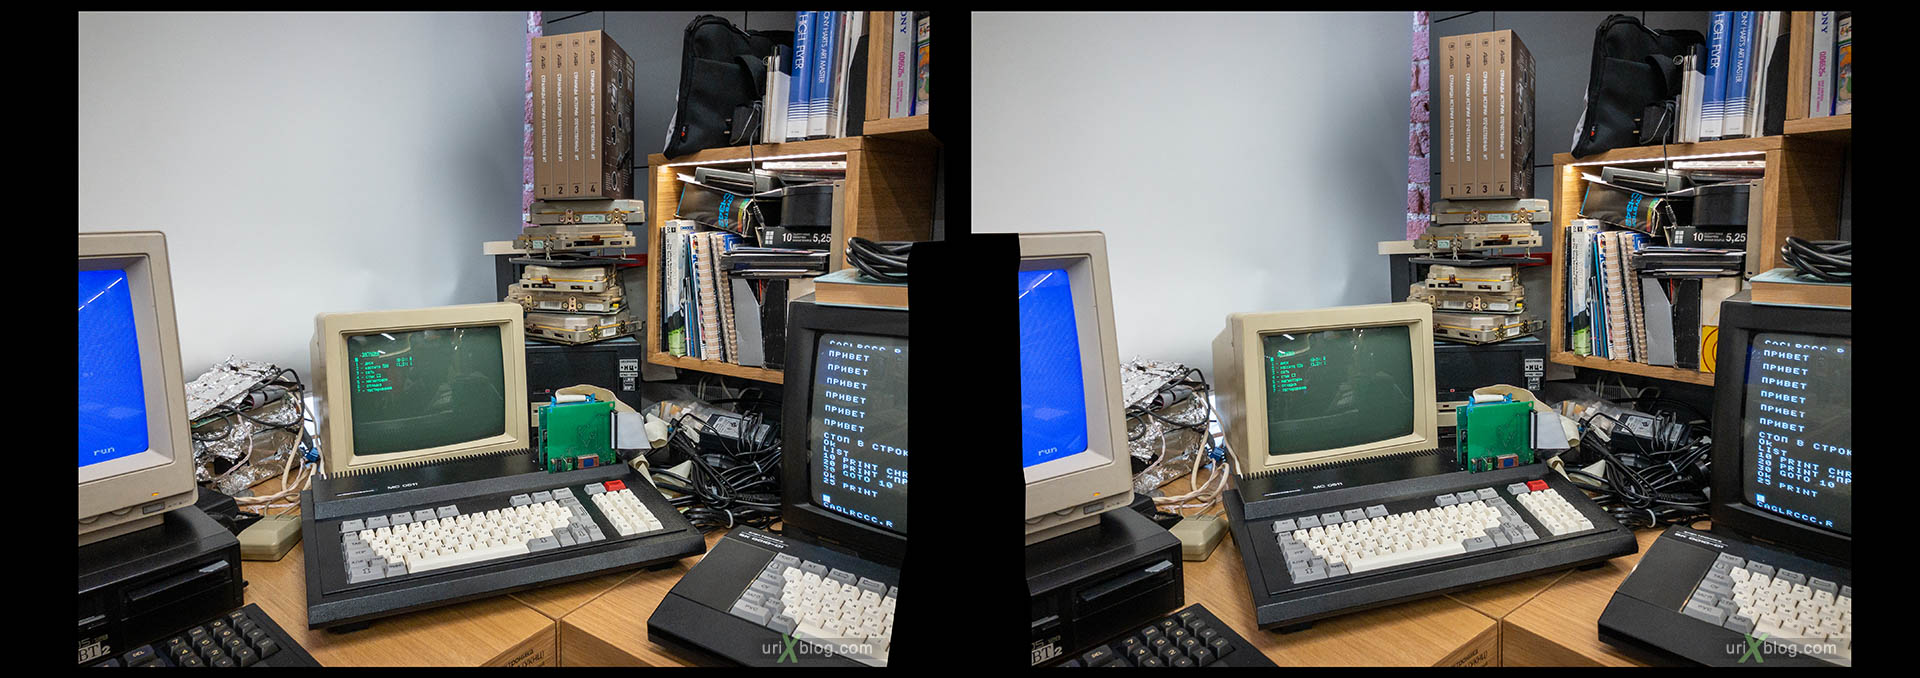 Yandex Store and Museum, old retro personal computers, Soviet, PC, Moscow, Russia, 3D, stereo pair, cross-eyed, crossview, cross view stereo pair, stereoscopic